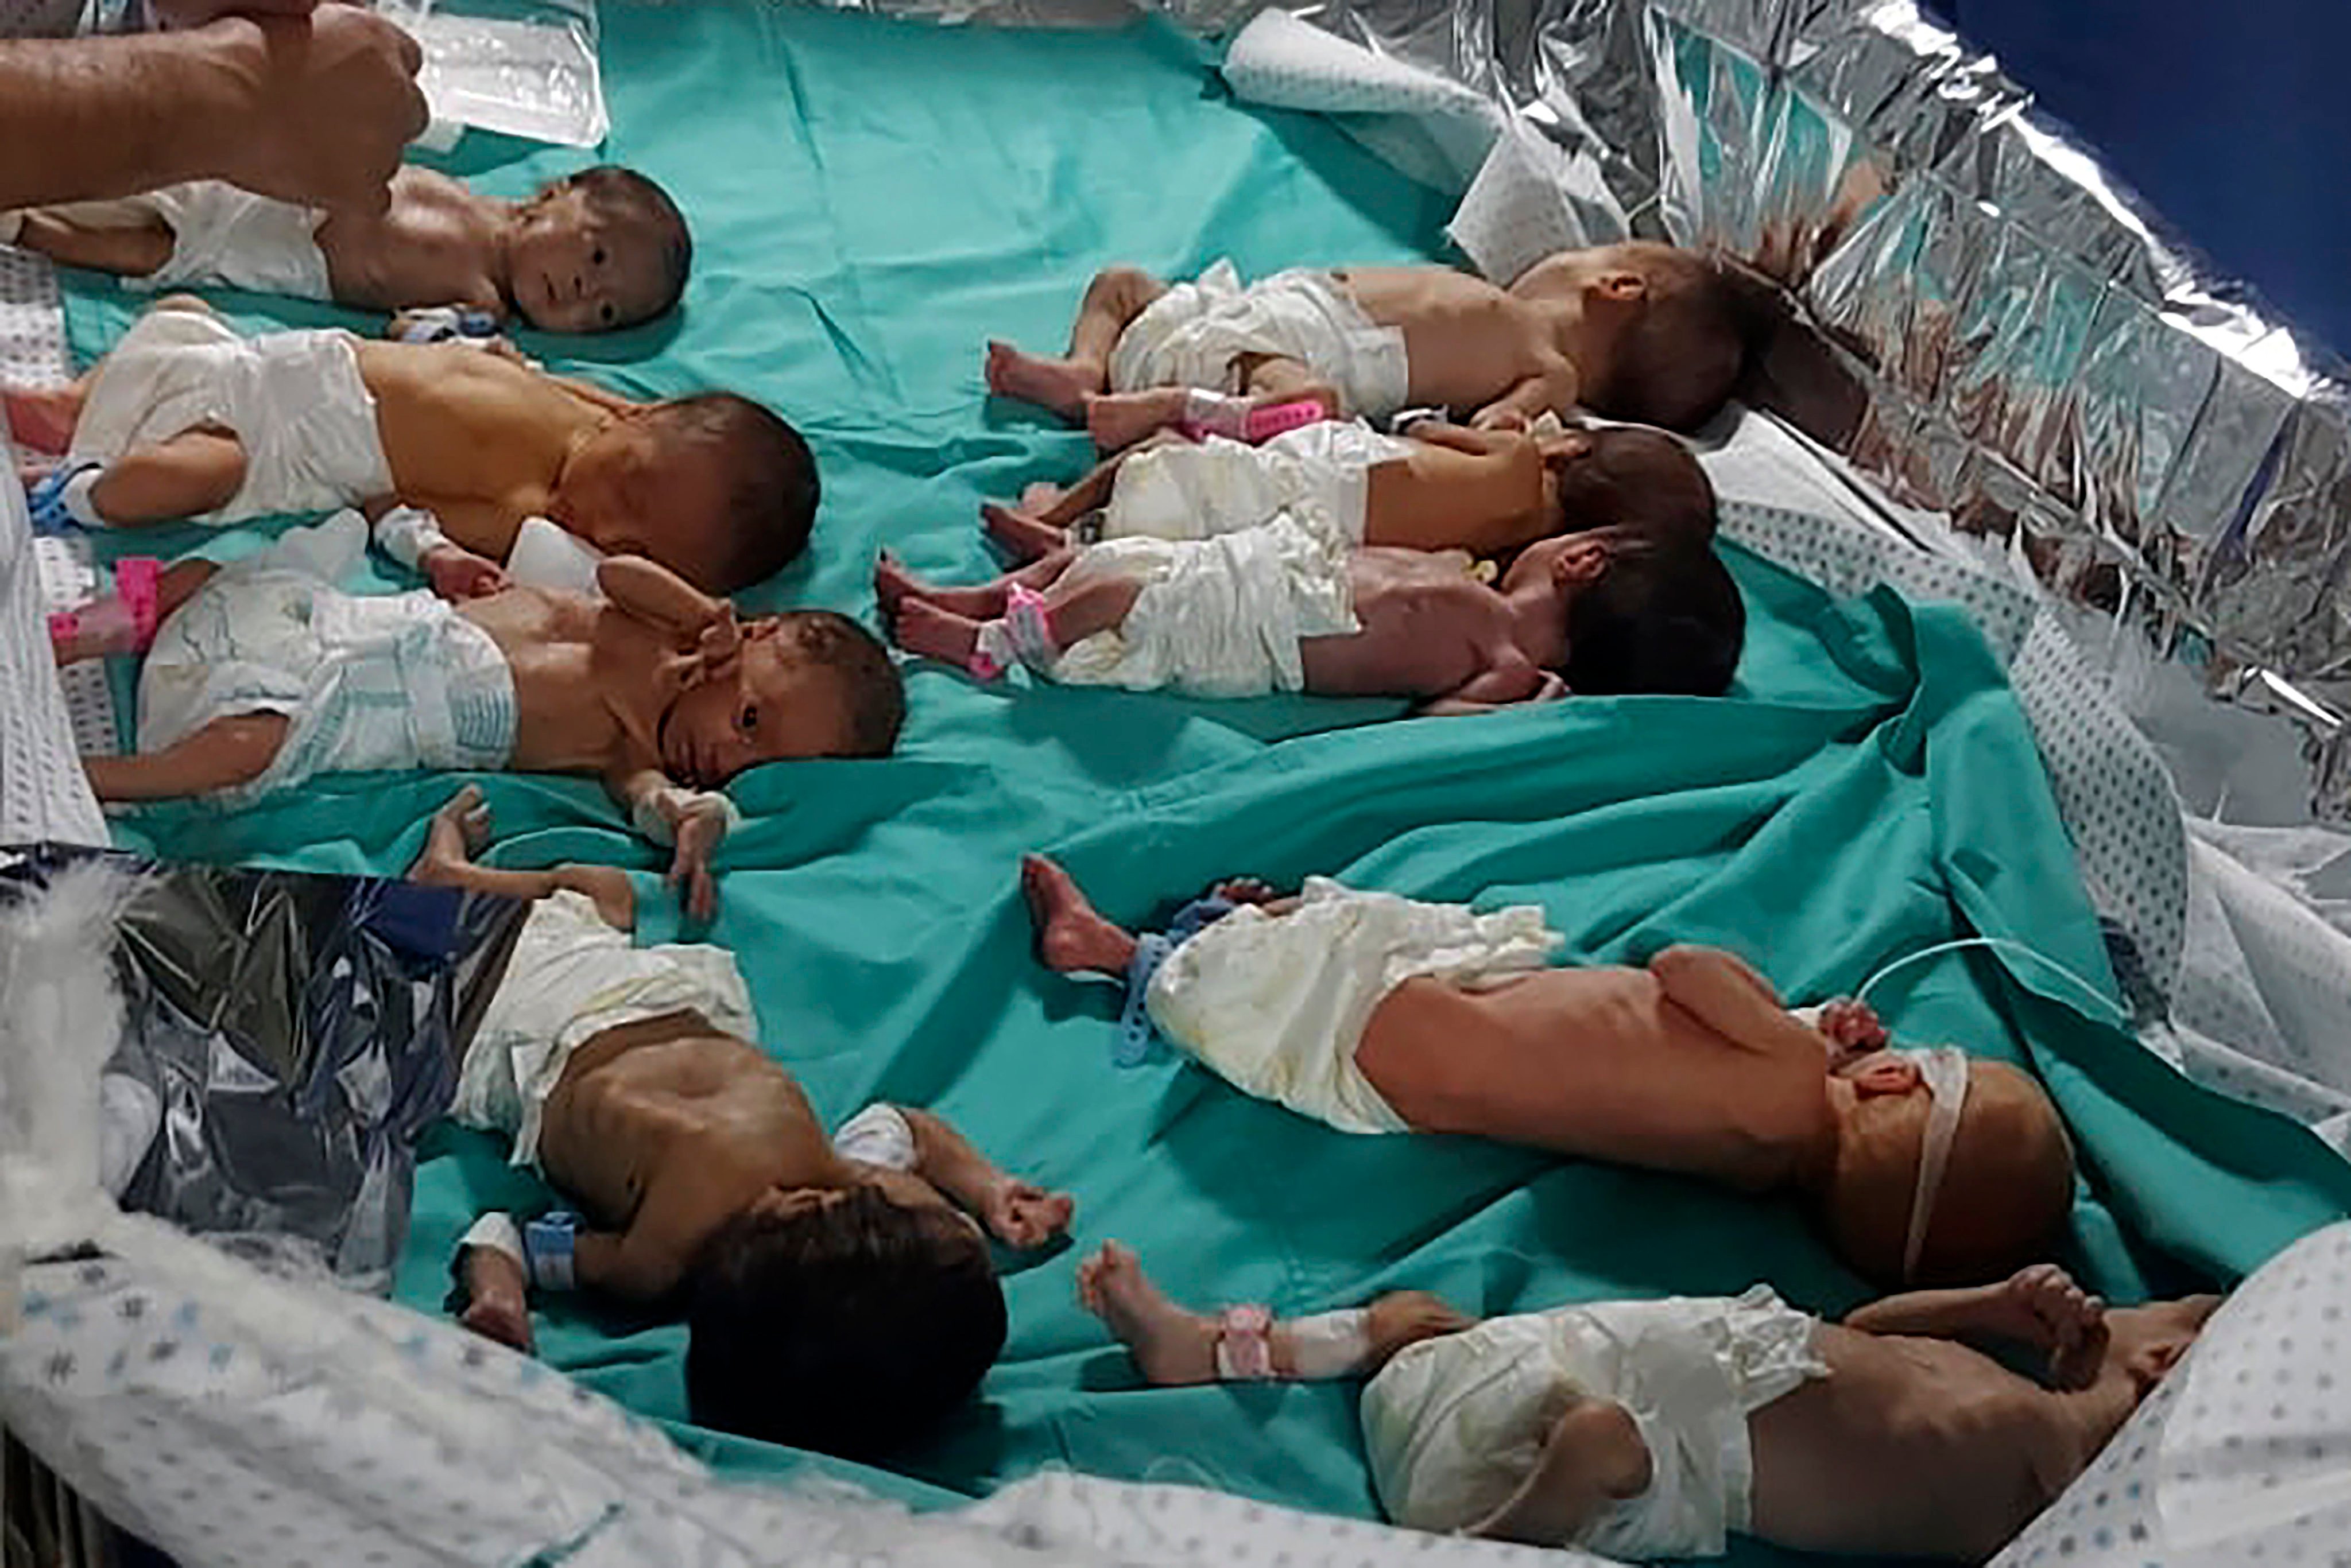 Premature Palestinian babies in the al-Shifa hospital in Gaza on November 12. On Sunday there were reports that at least 30 such babies were being evacuated. Photo: Dr Marawan Abu Saada via AP